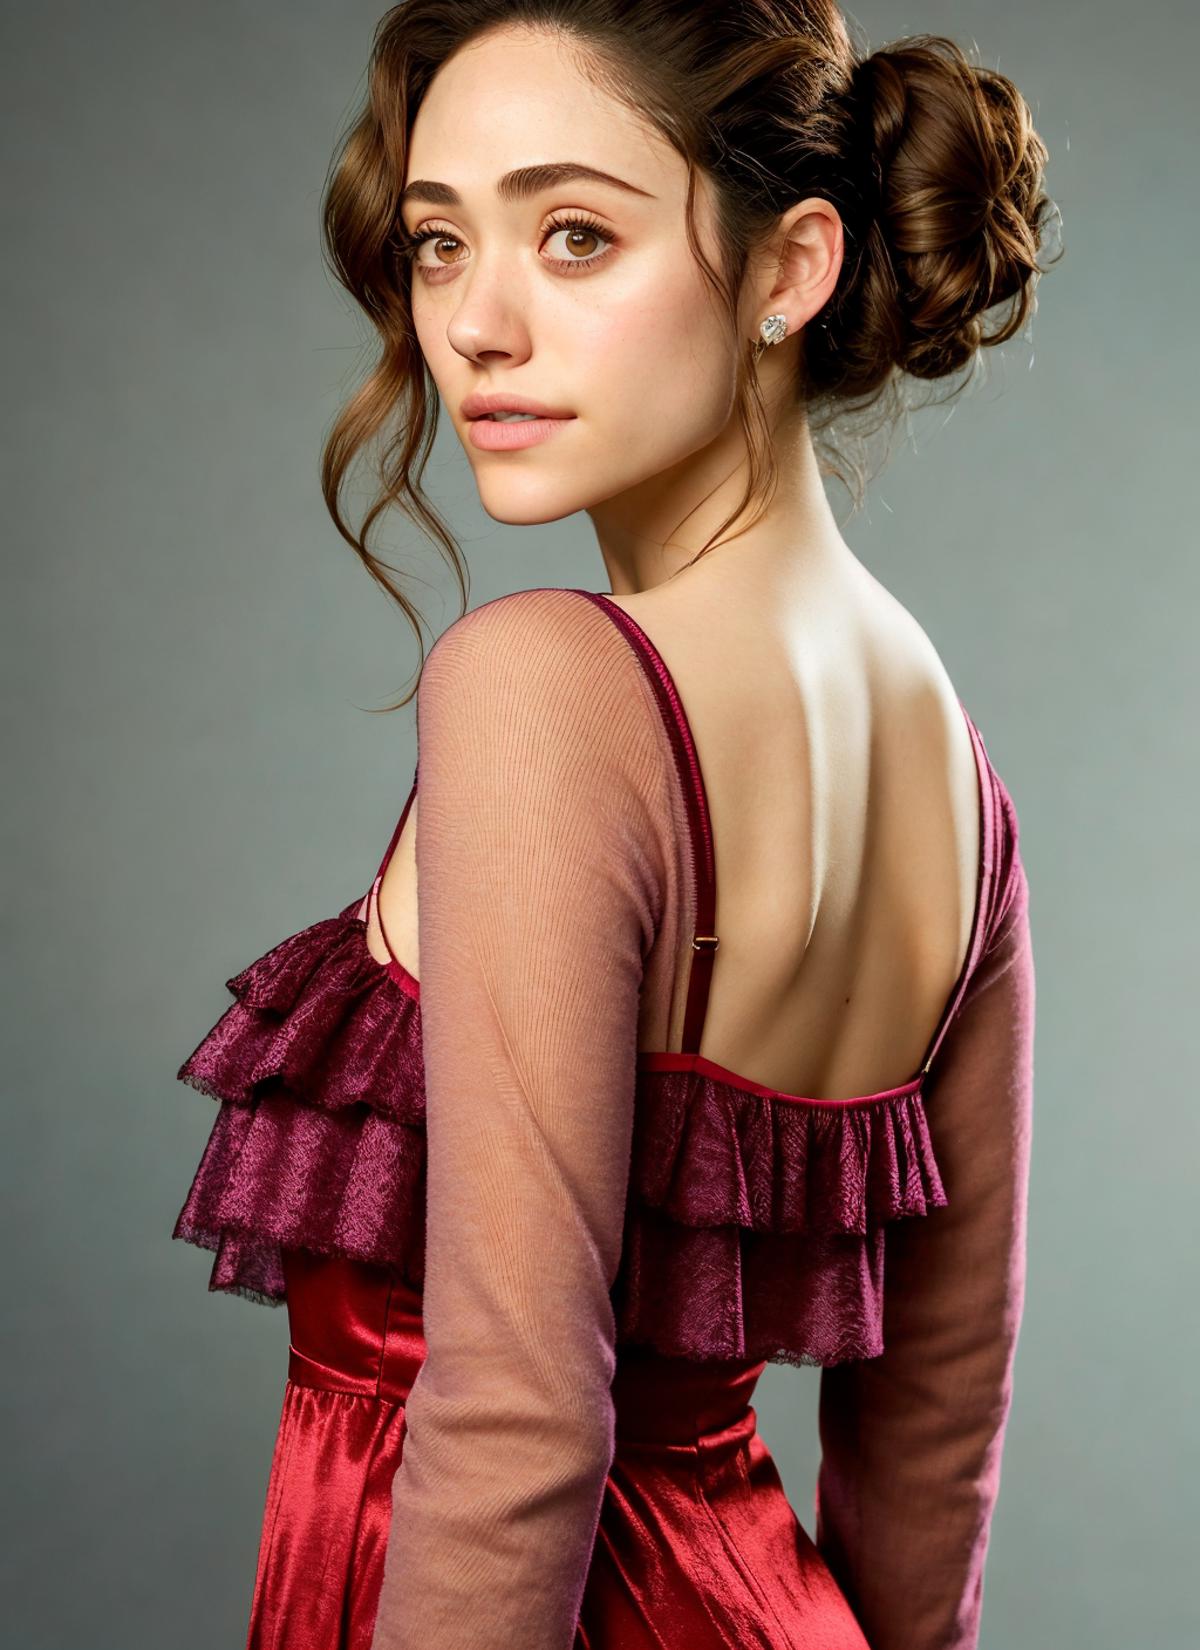 Emmy Rossum (Fiona Galagher from Shameless TV show) image by astragartist